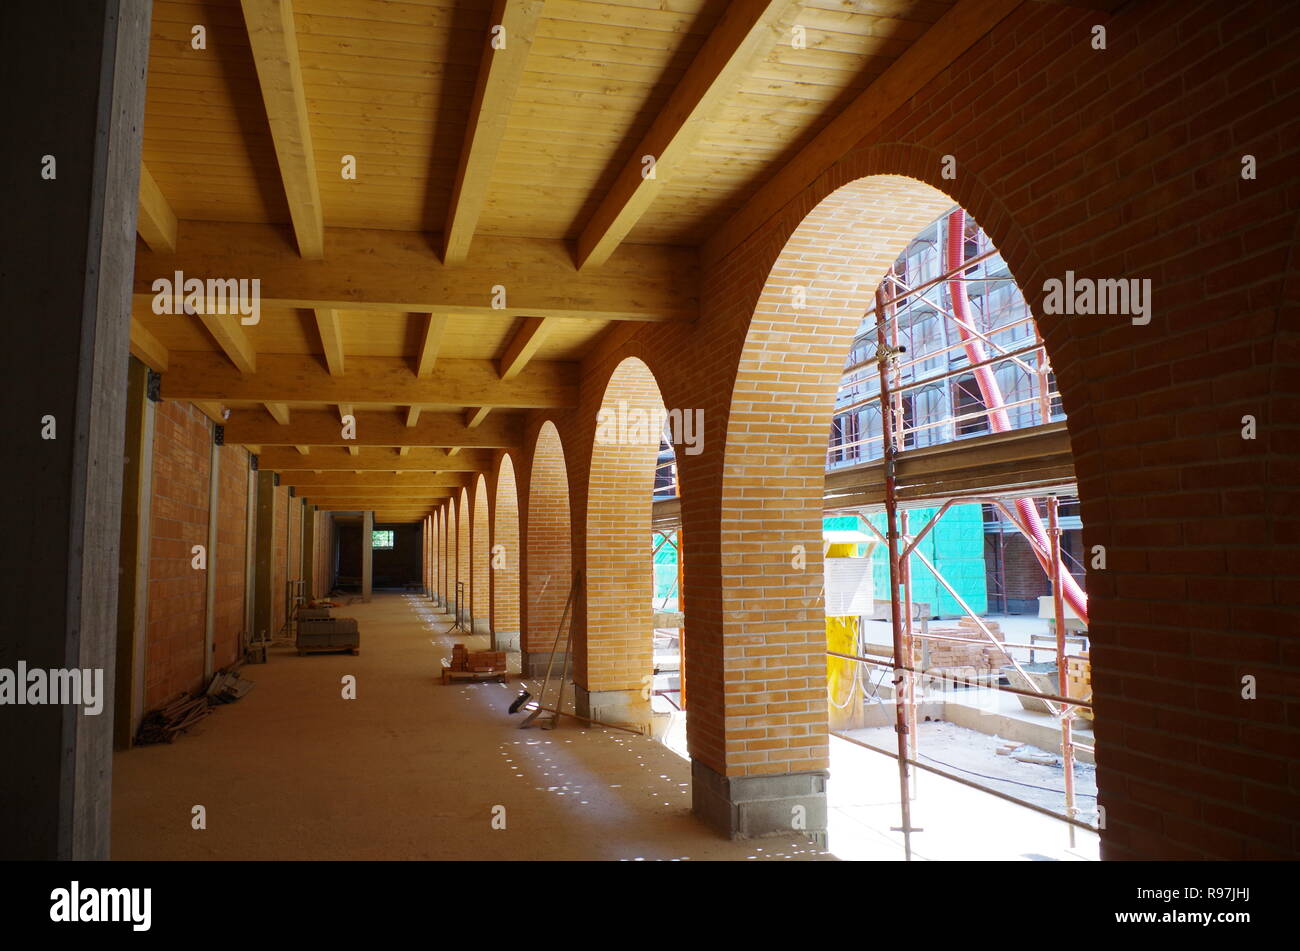 WOOD ARCHITECTURE BUILDING  NEAR MILAN LAMINATED TIMBER -  ROOF AND WOOD - COSTRUZIONE IN LEGNO LAMELLARE Stock Photo